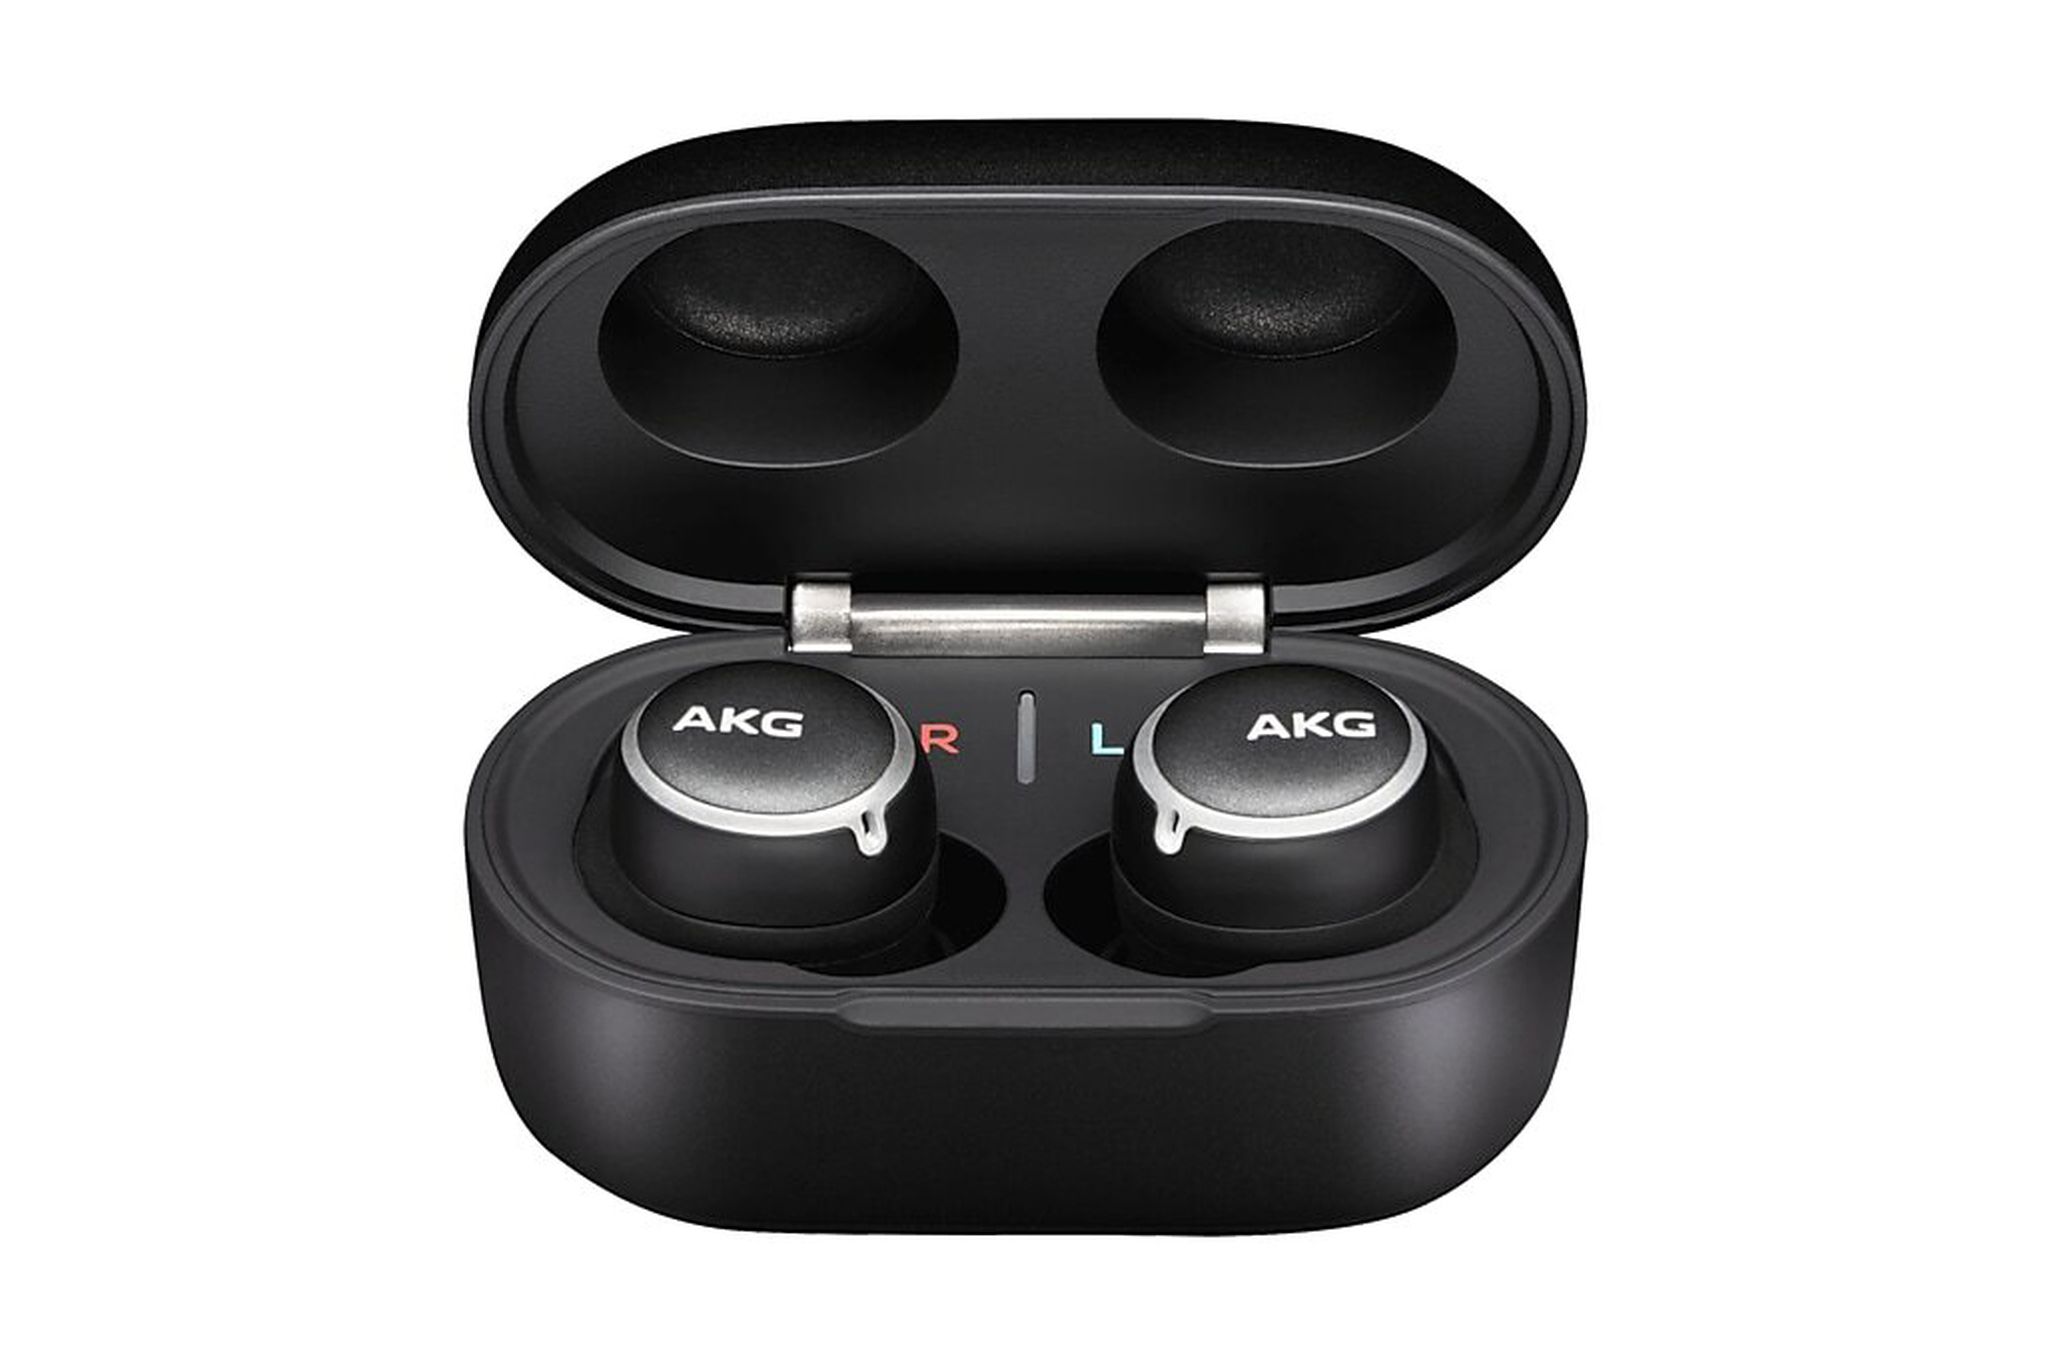 Samsung’s AKG quietly launches noise-cancelling Galaxy Buds Plus rival ...